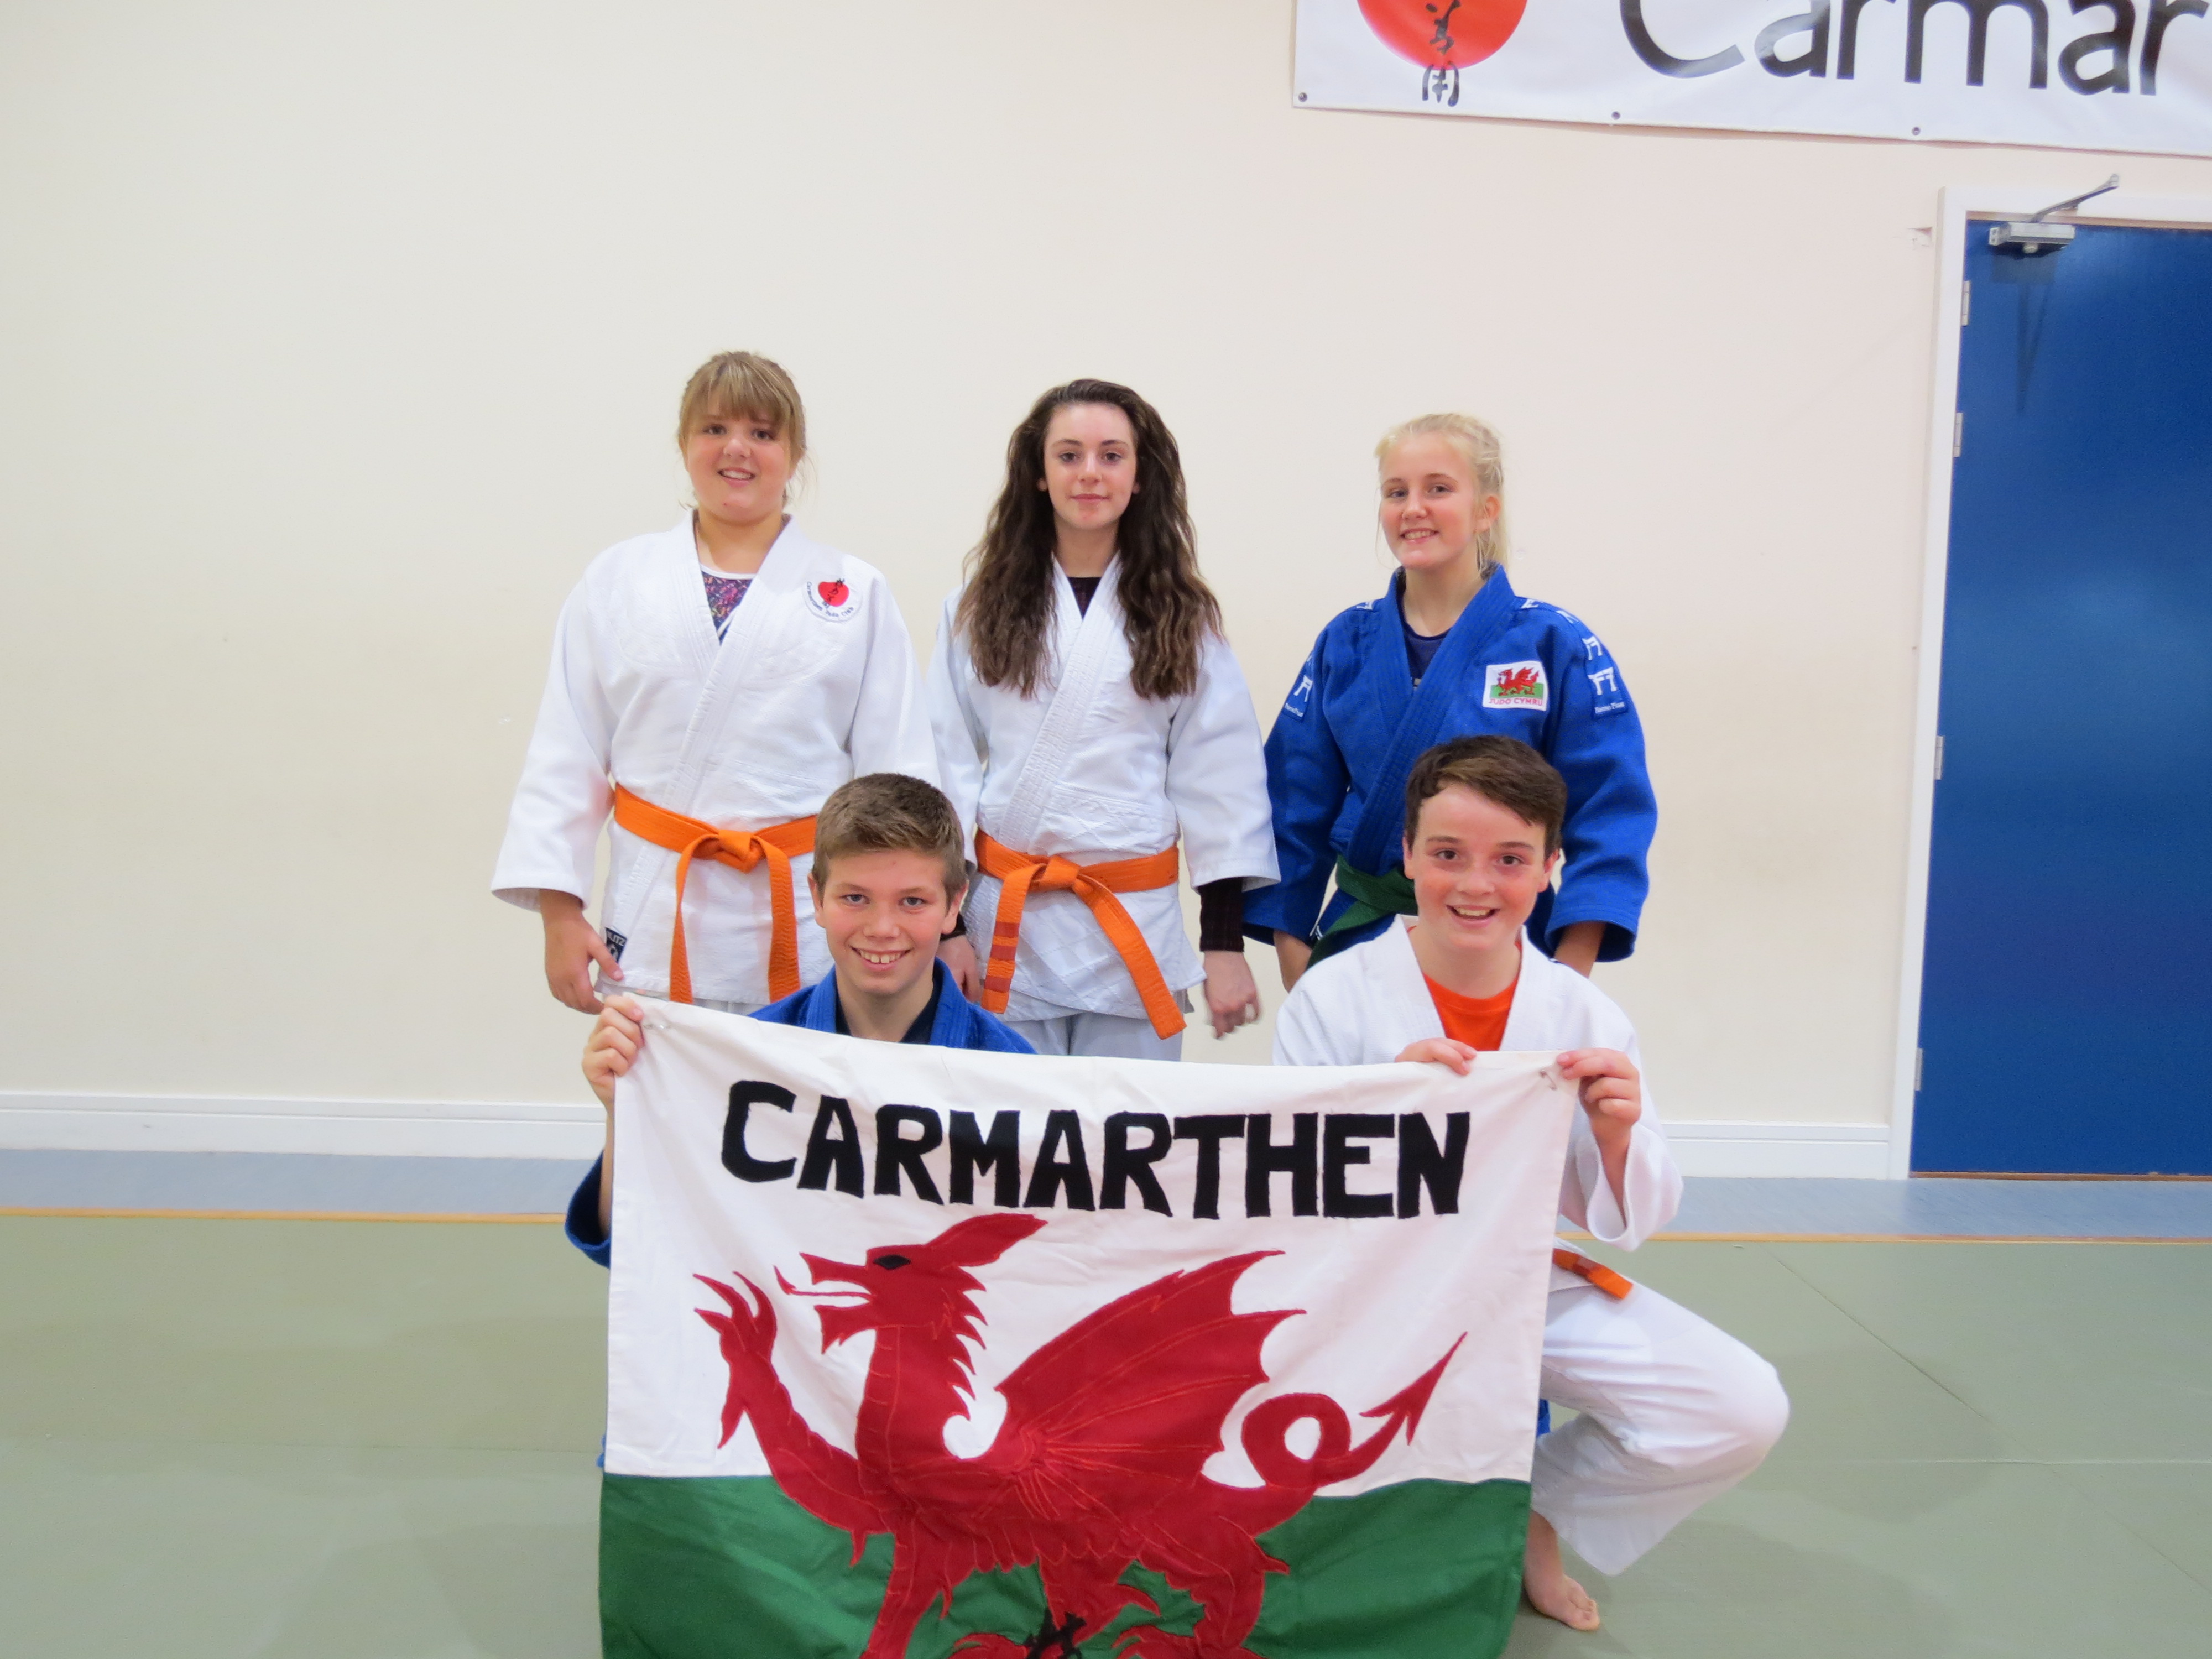 Welsh Schools Qualifying Competition September 2015